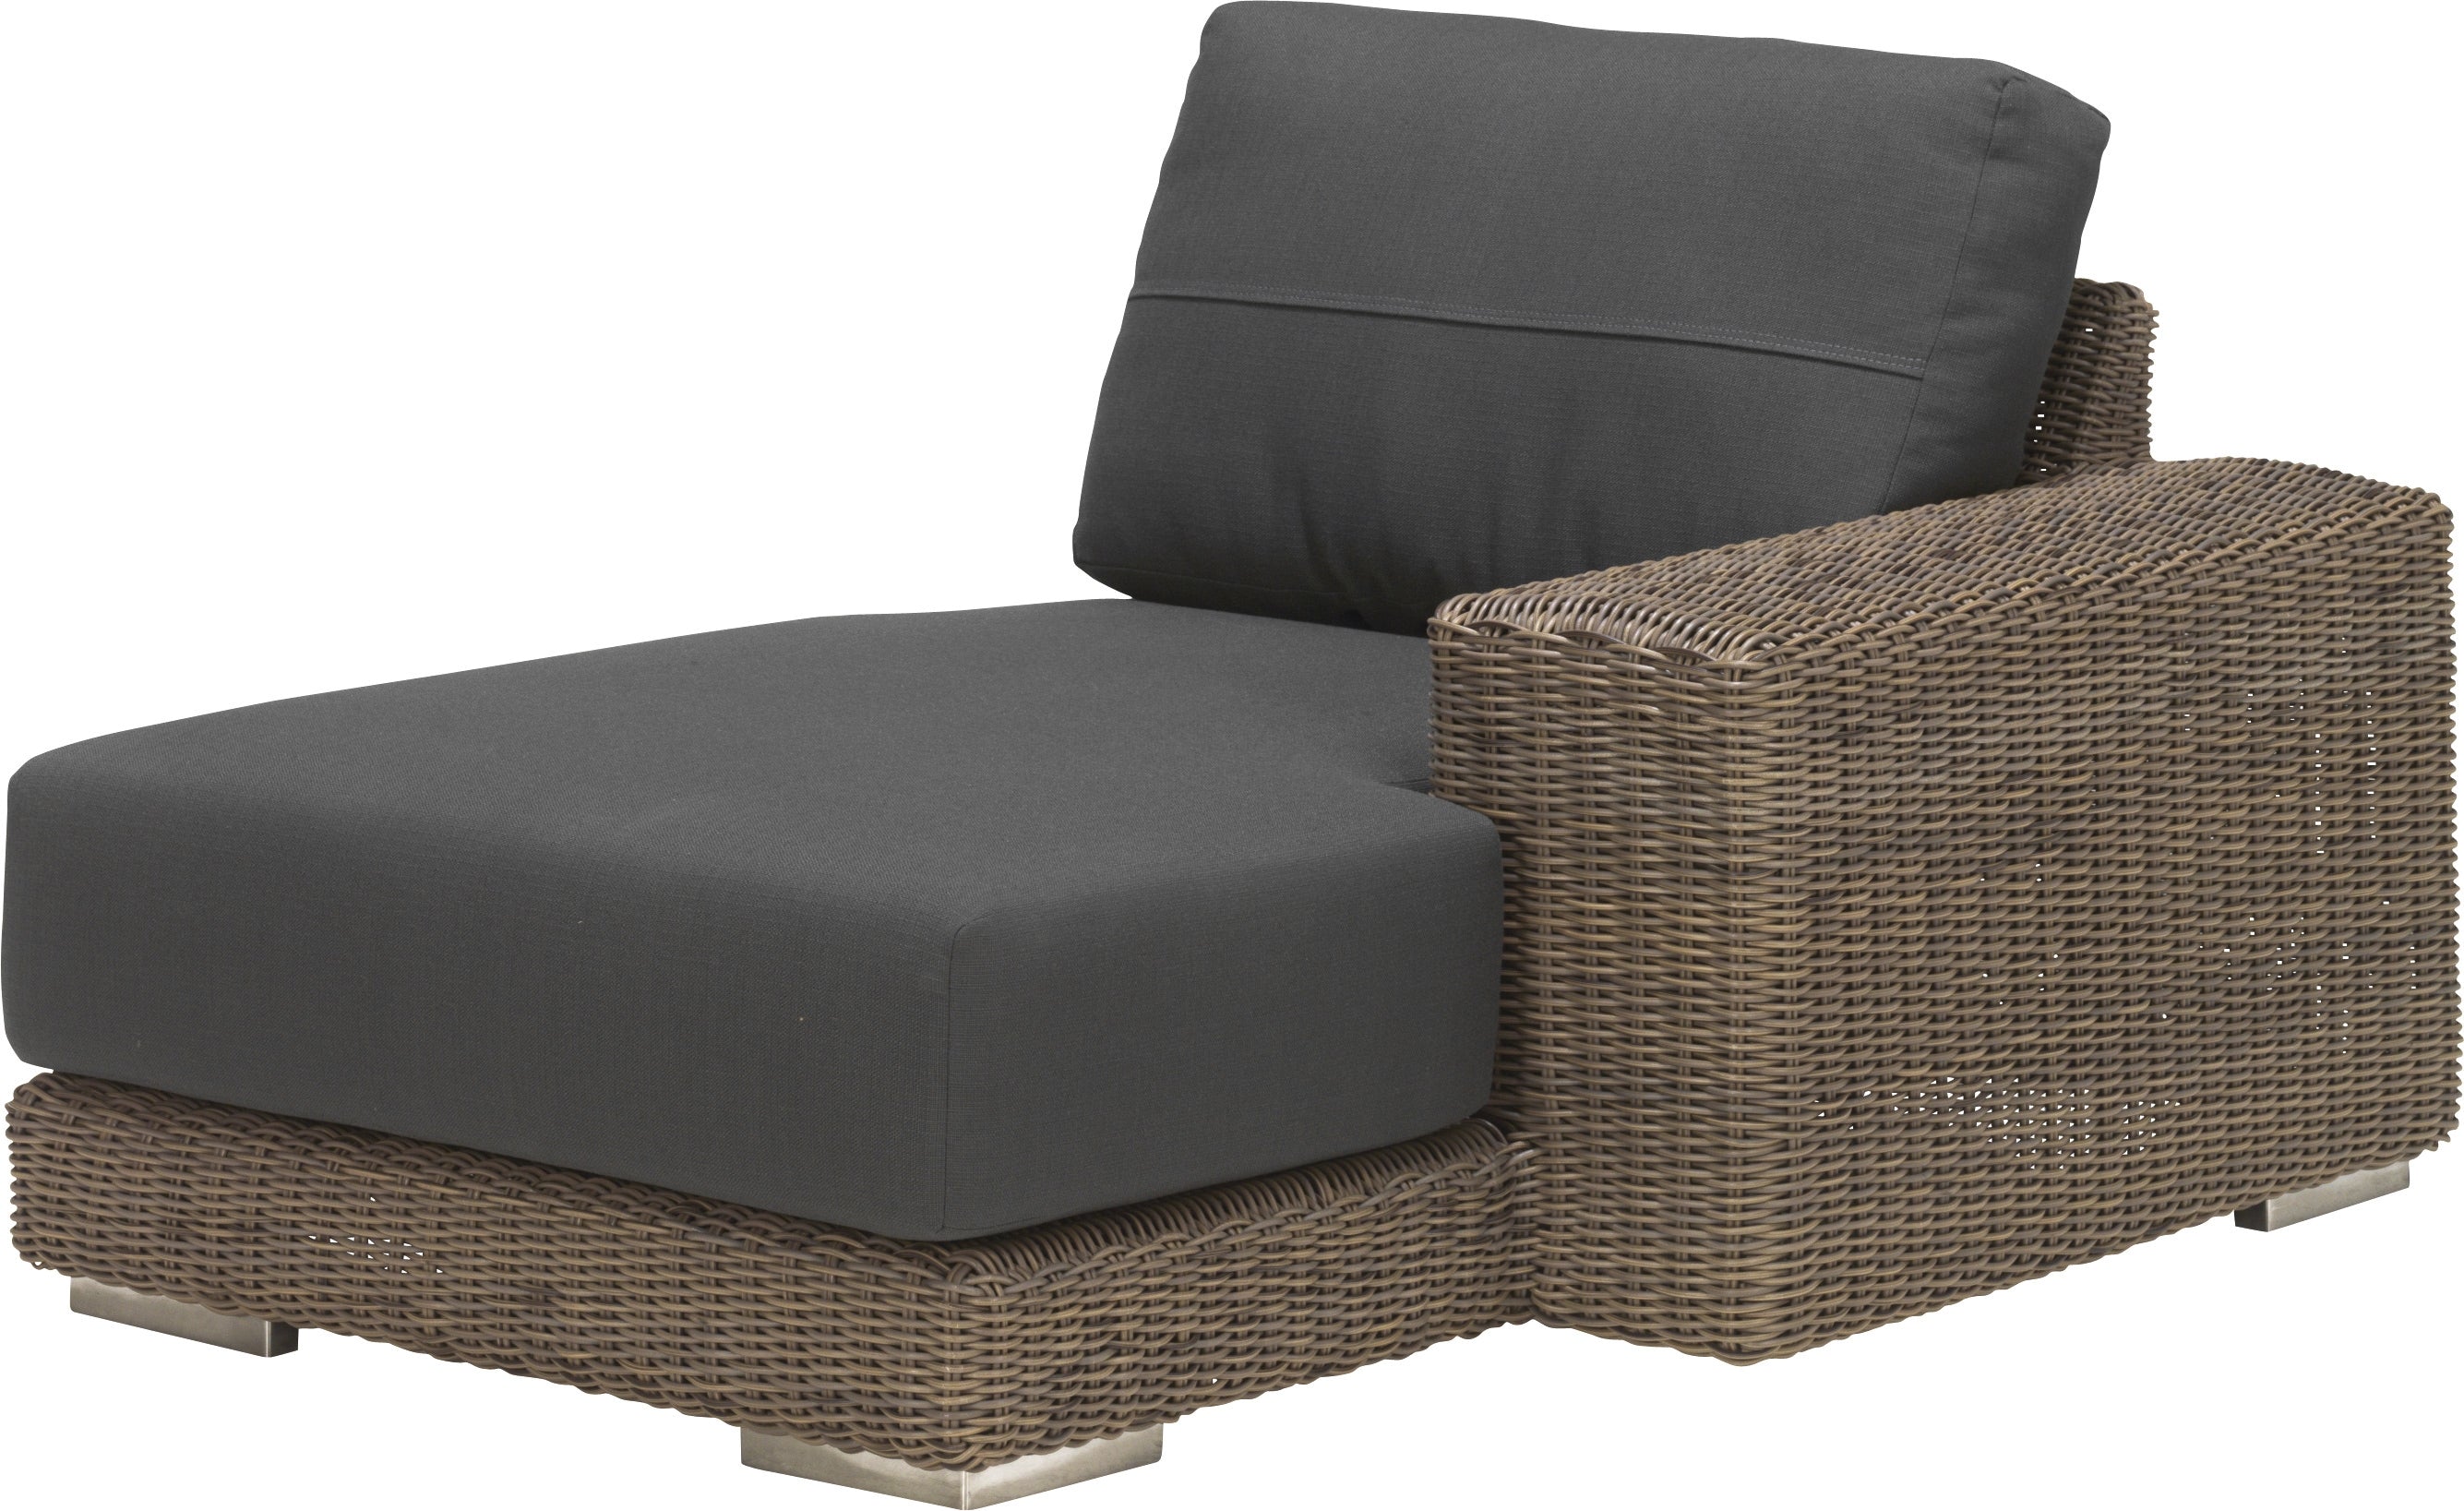 4 Seasons Outdoor Kingston Modular Chaise-Lounge Left With 2 Cushions